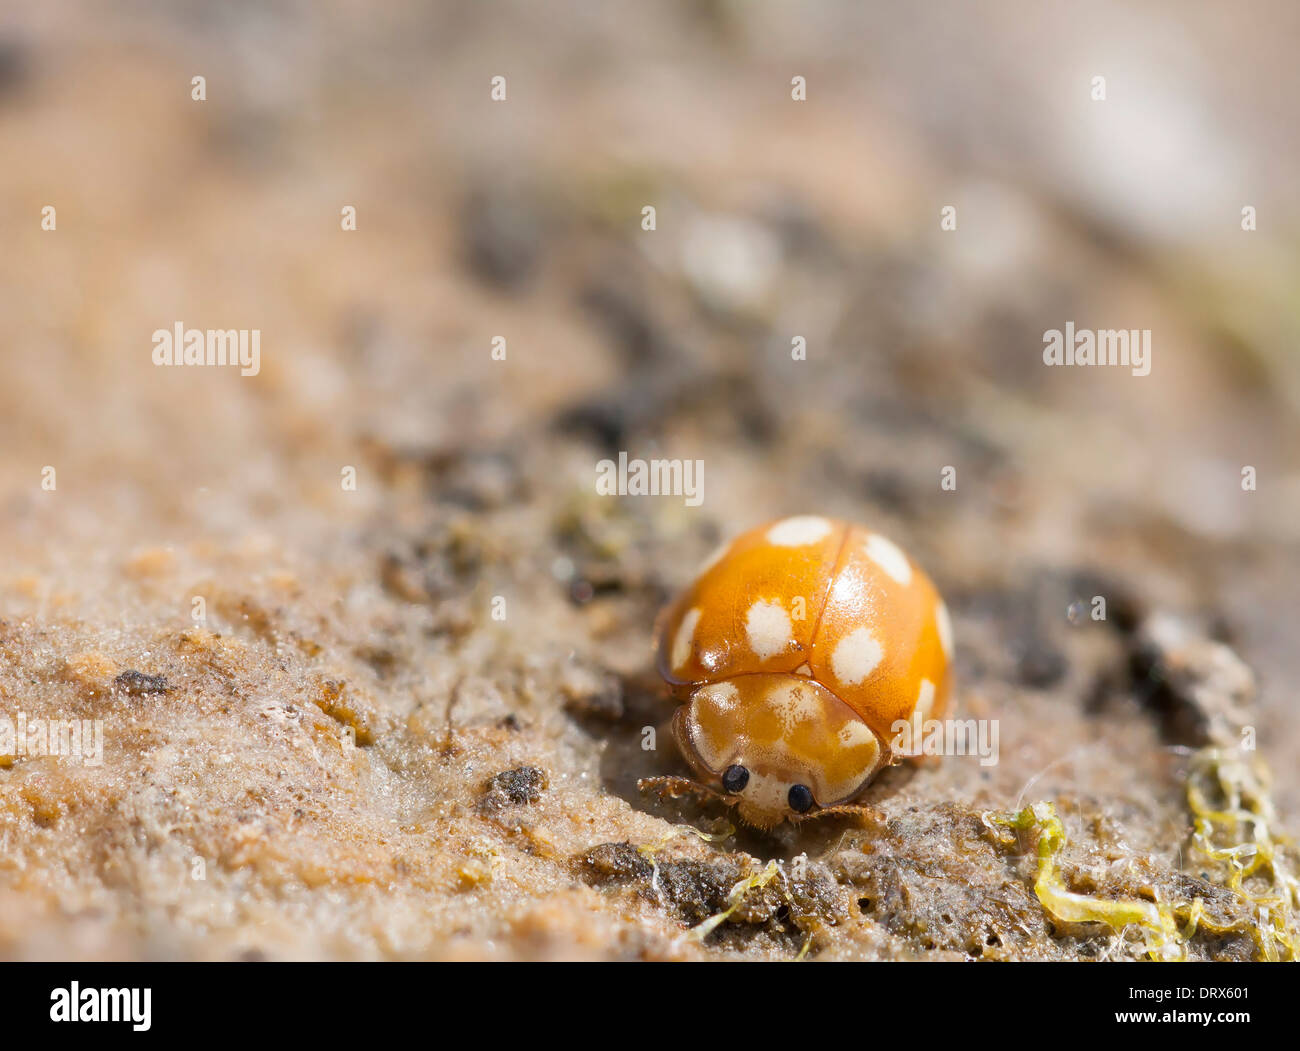 Closeup of an orange baby ladybird with white dots or spots Stock Photo